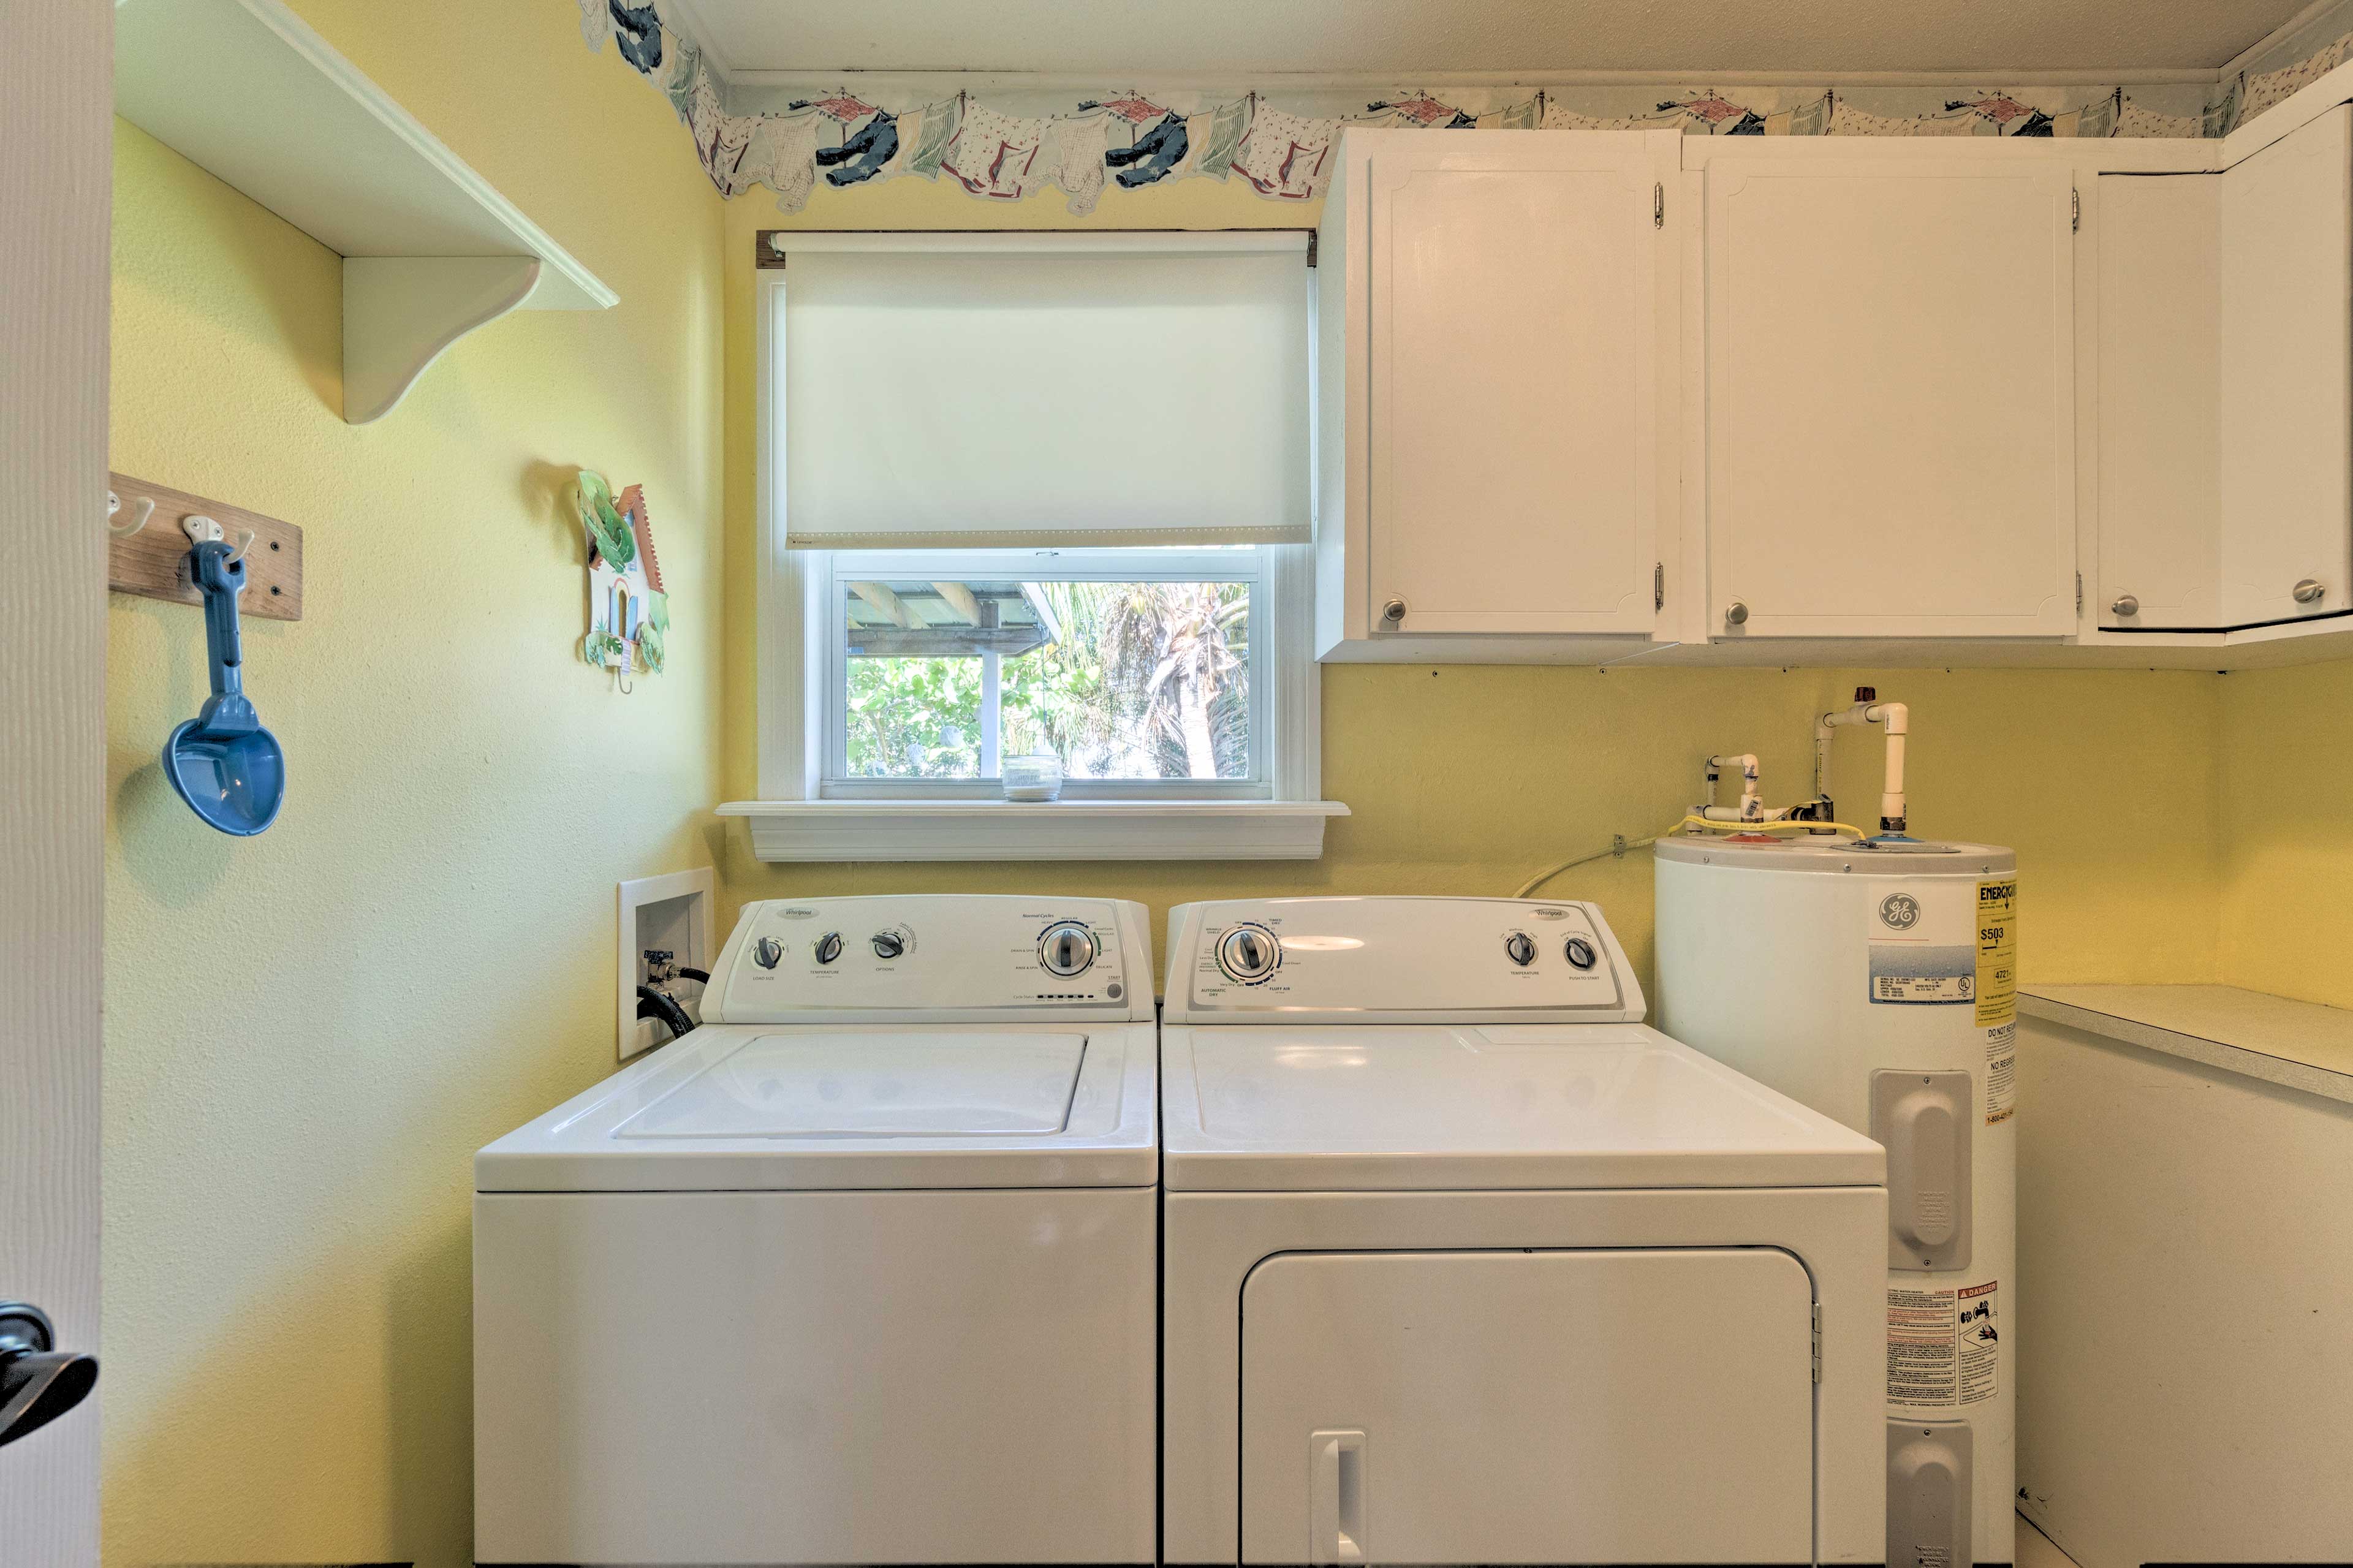 Keep your fishing gear looking fresh with the home's laundry machines.